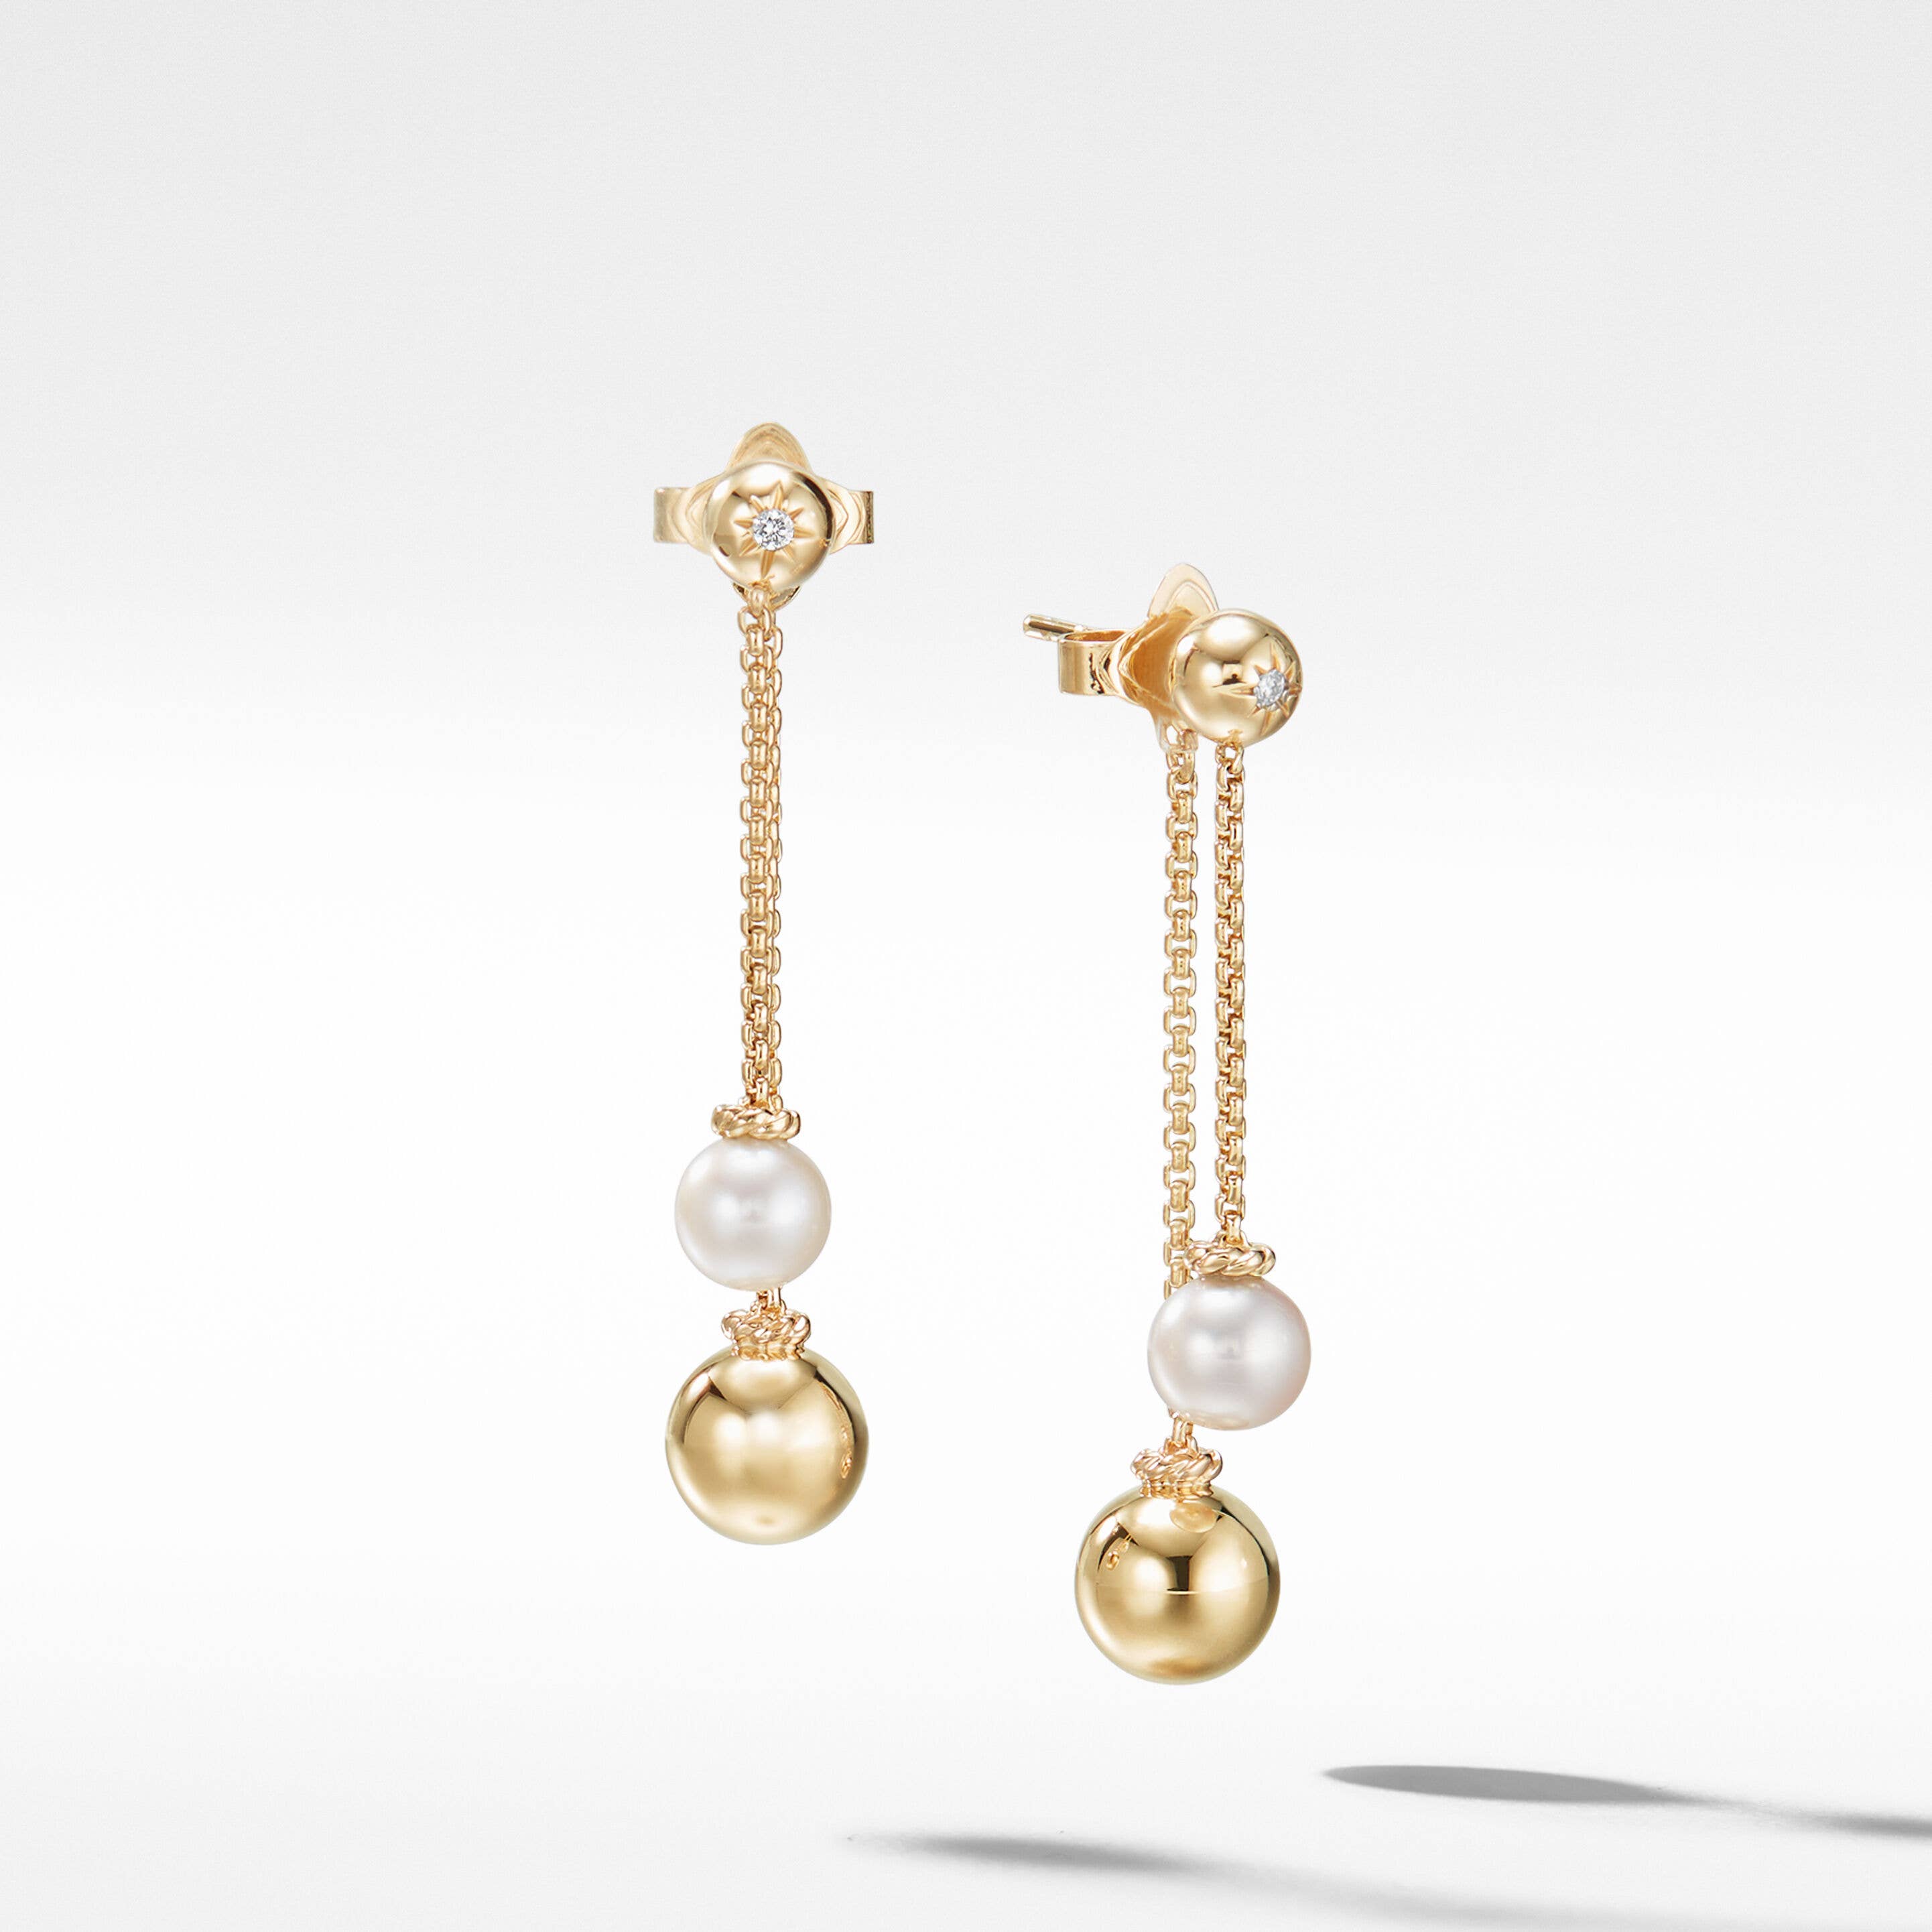 Solari Chain Drop Earrings in 18K Yellow Gold with Pearls and Diamonds